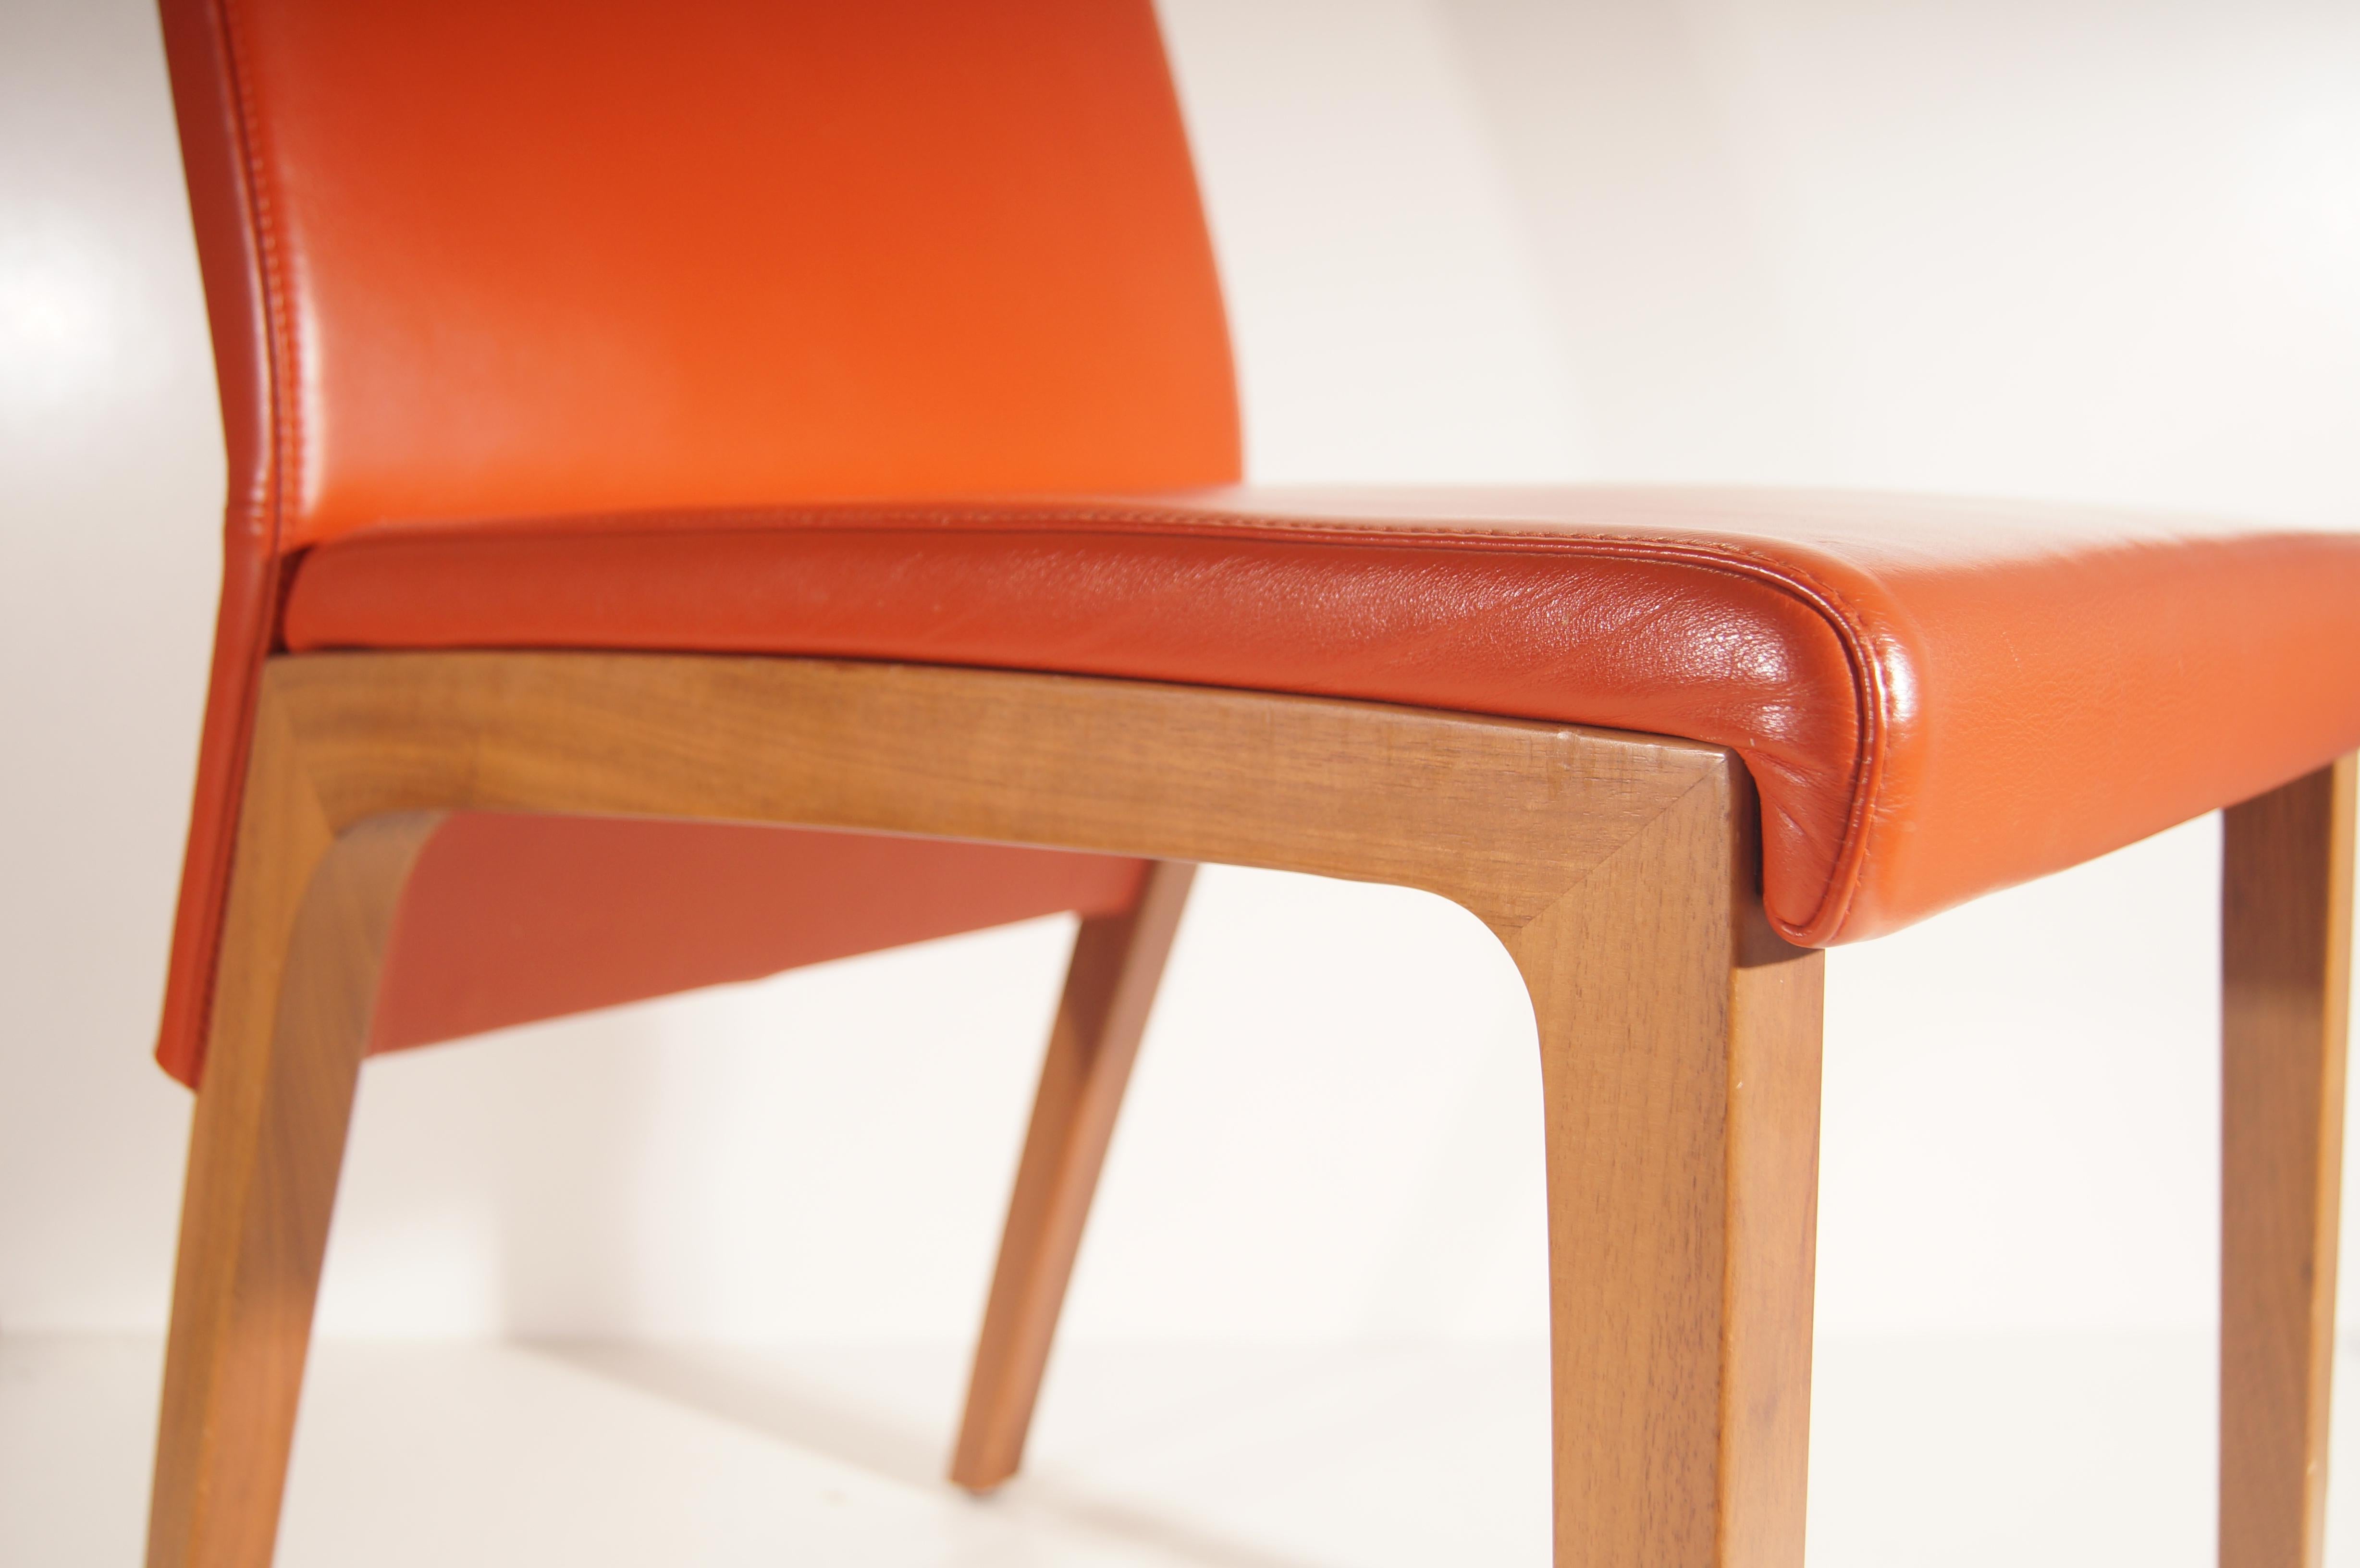 Rolf Benz - Dining room chair in orange leather 5